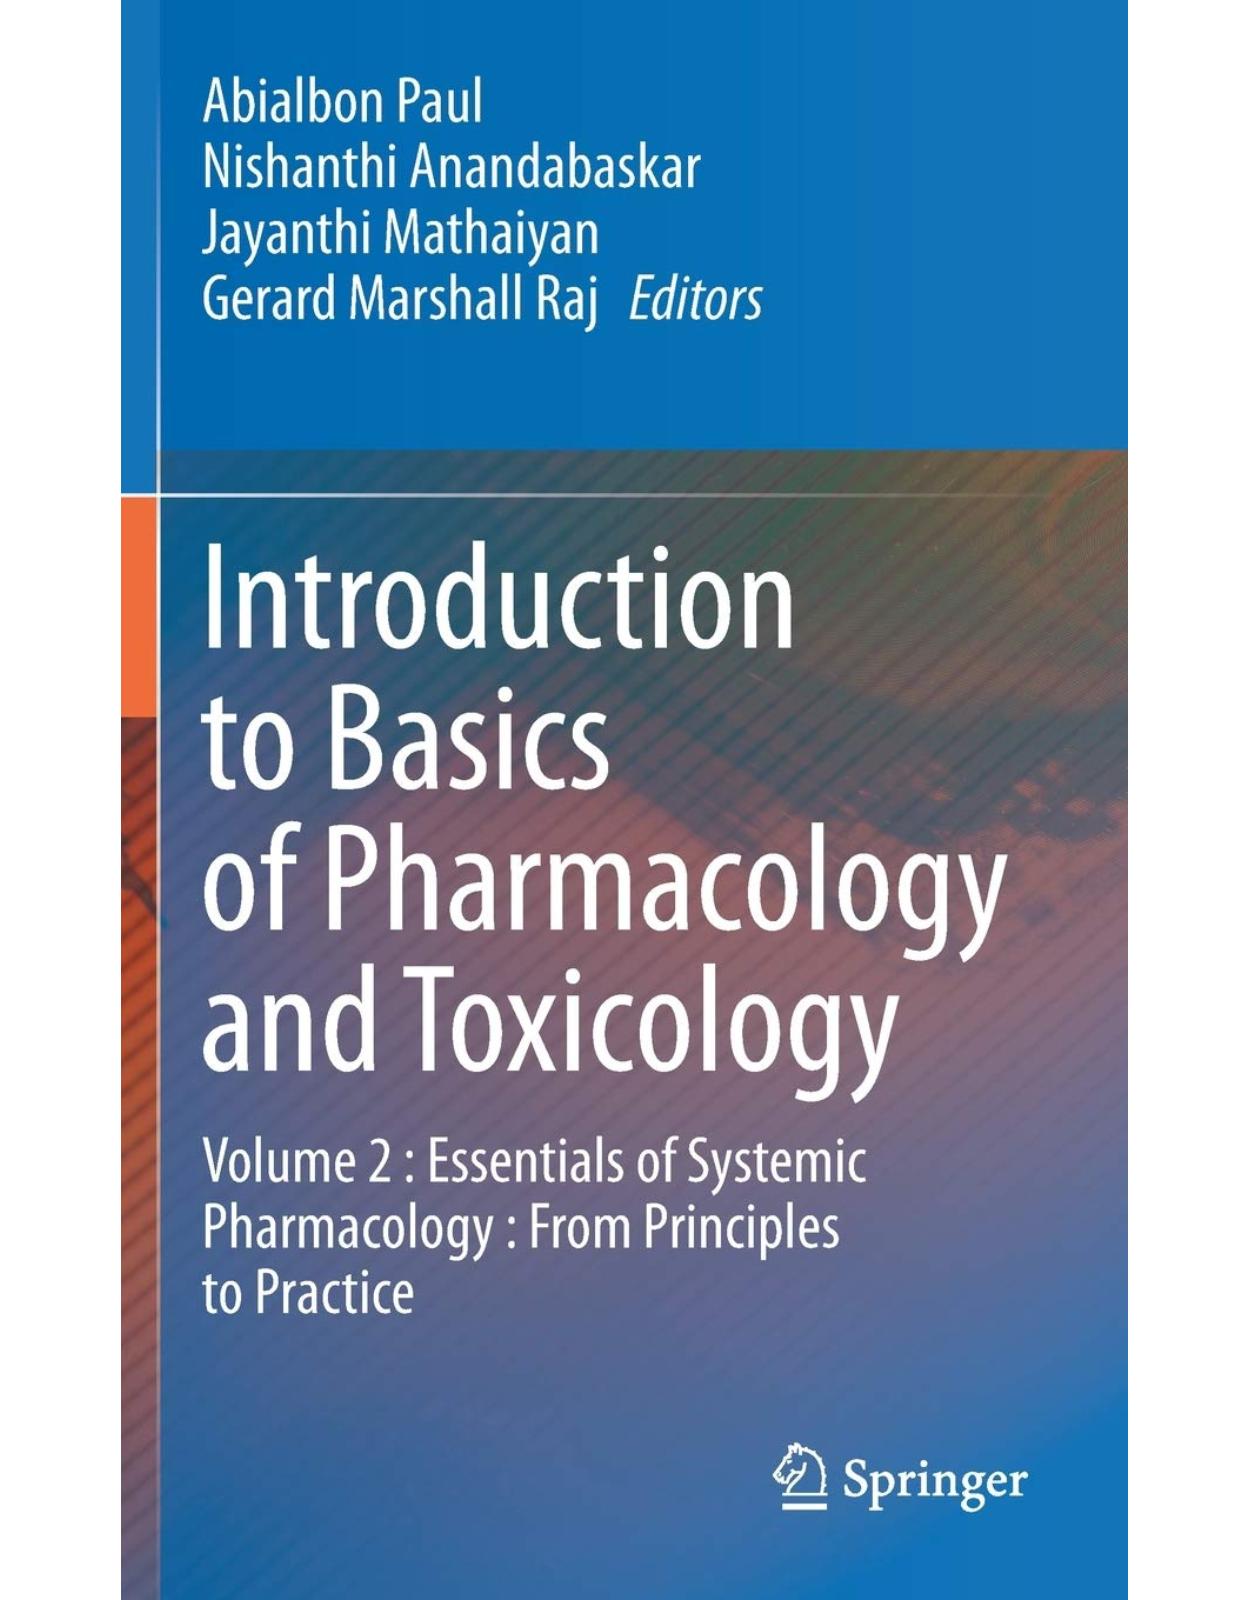 Introduction to Basics of Pharmacology and Toxicology: Volume 2 : Essentials of Systemic Pharmacology : From Principles to Practice